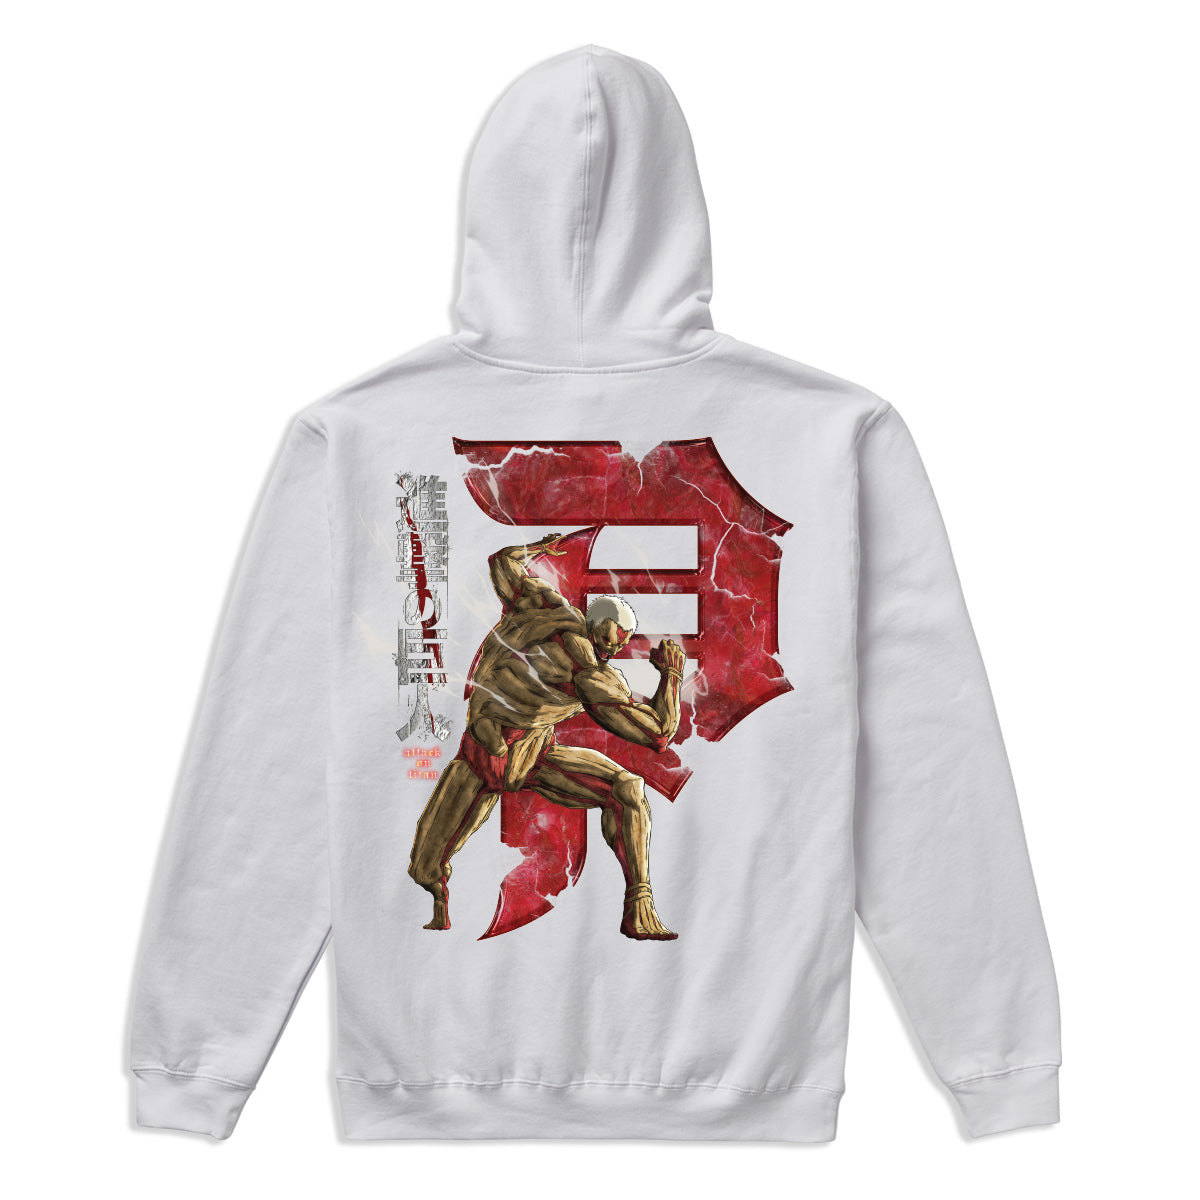 Primitive x Titans Armored Dirty P Hoodie - White image 1